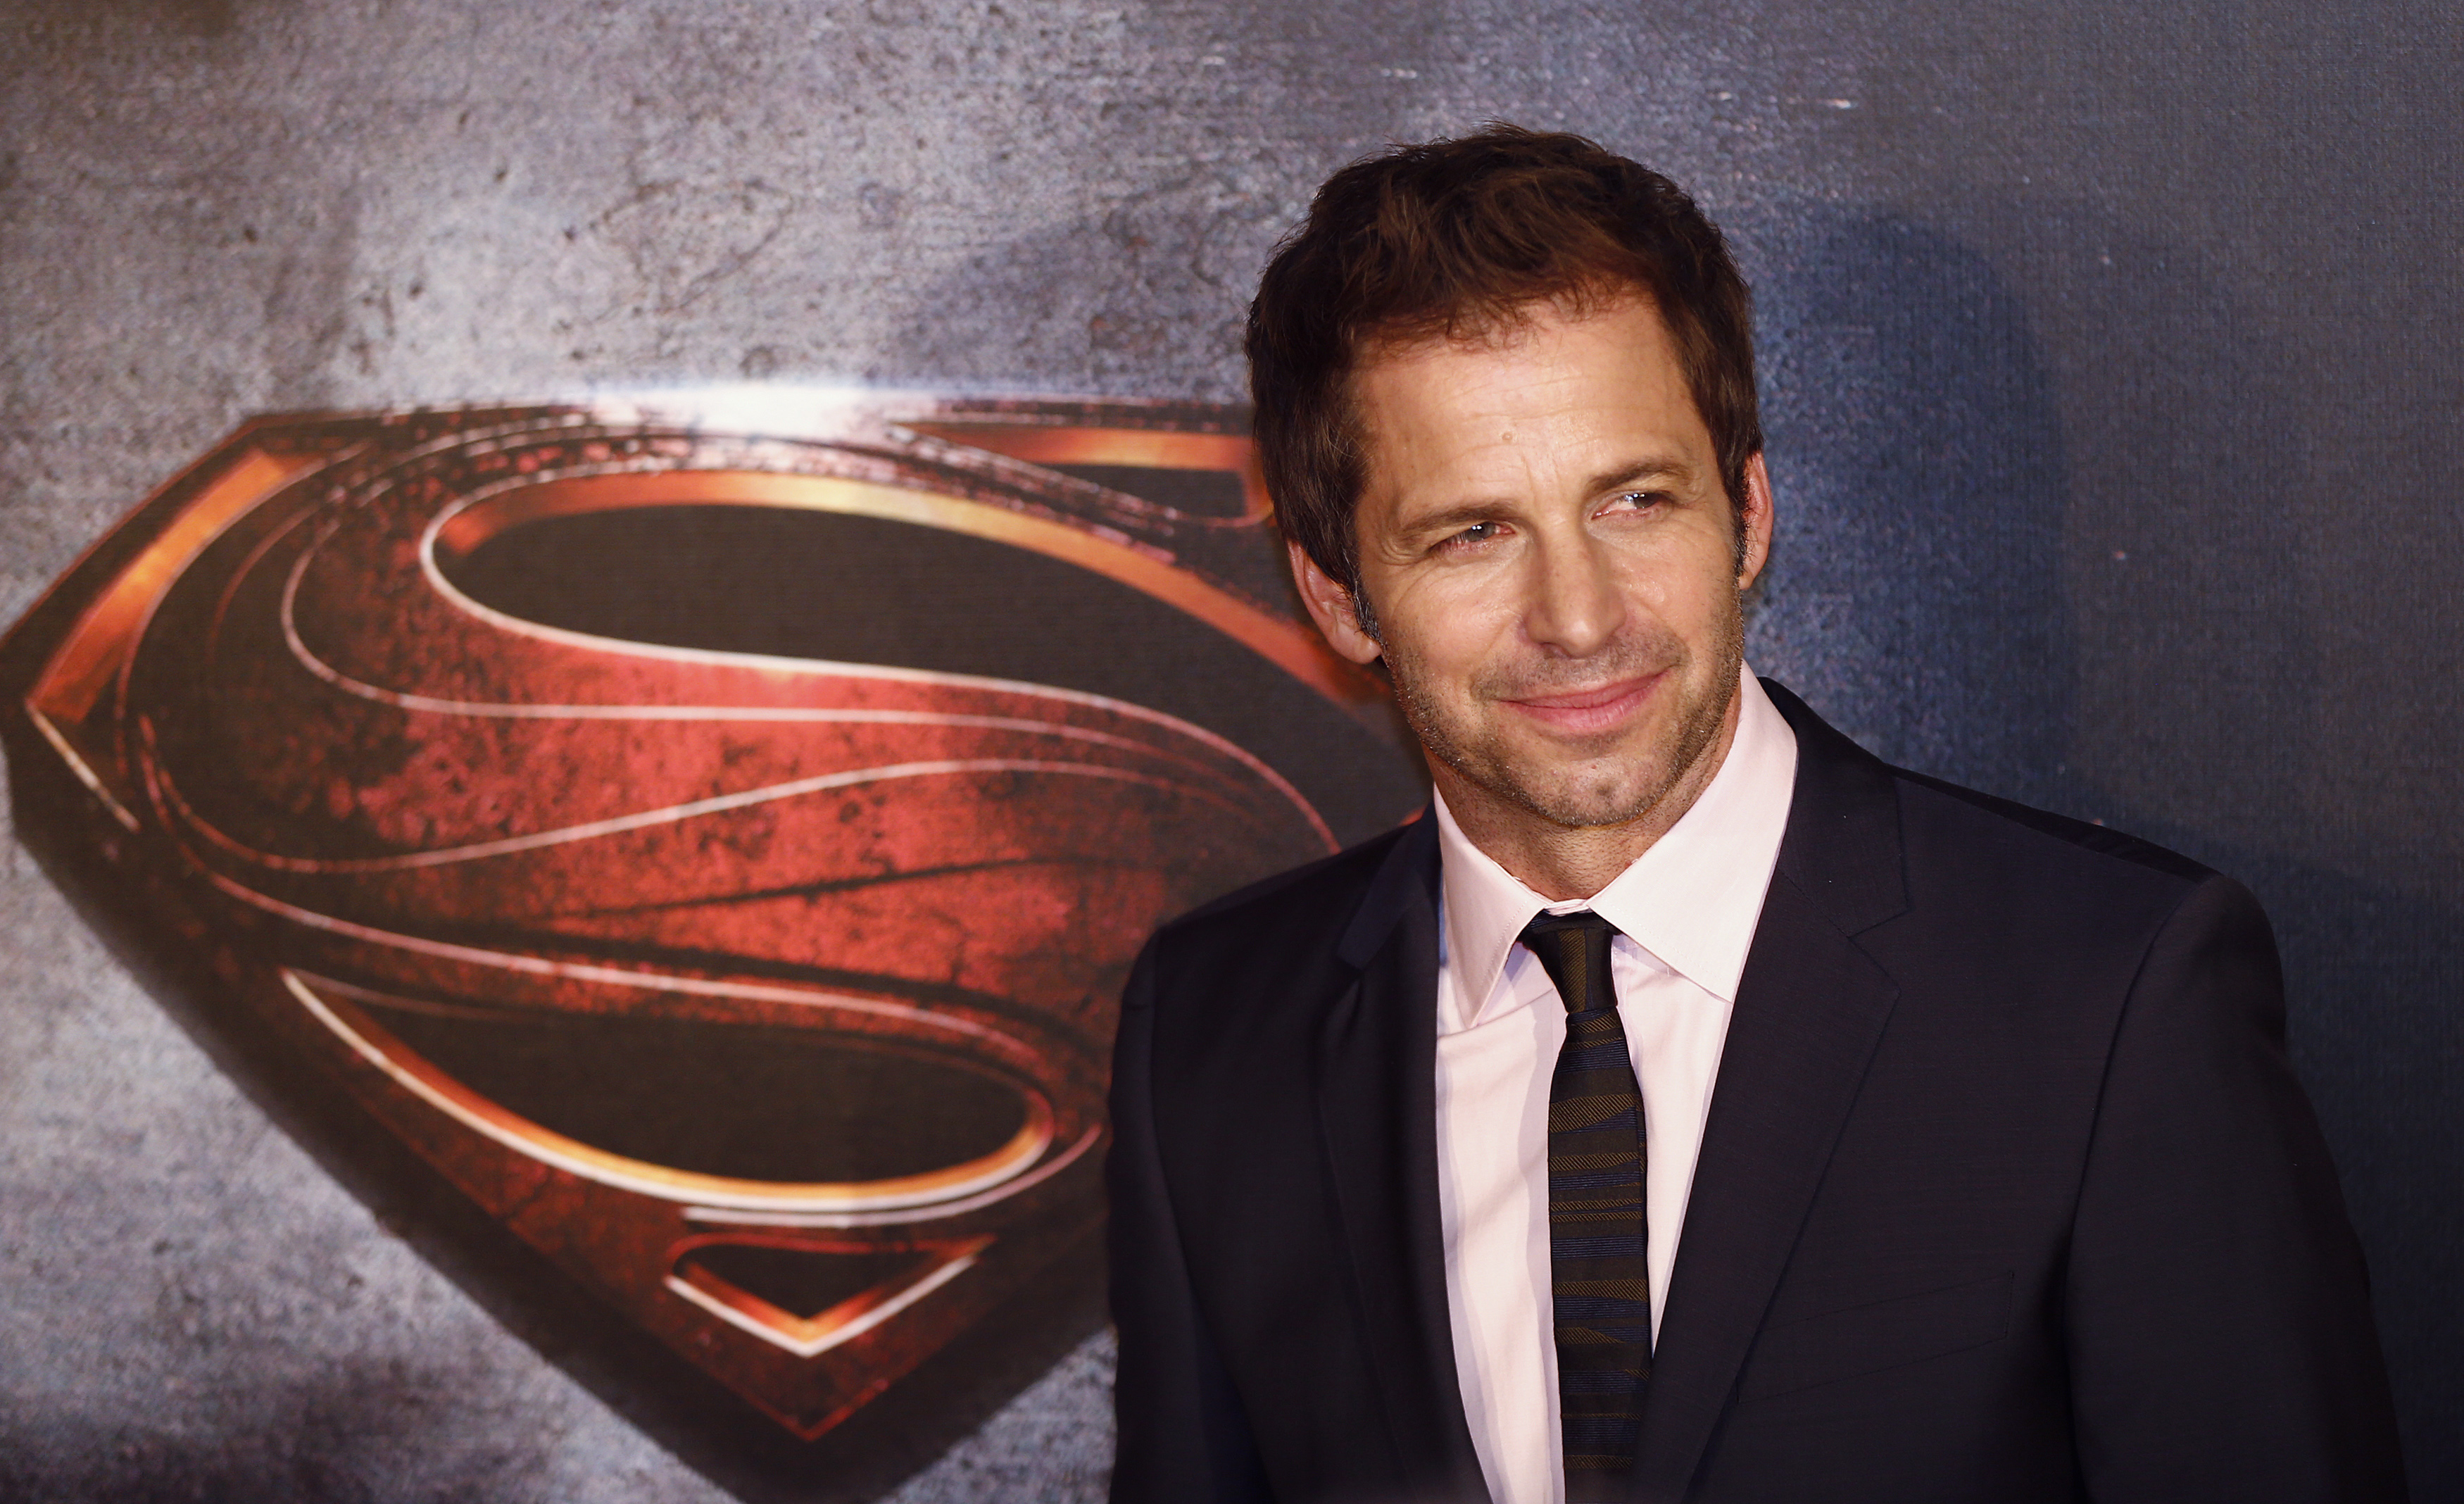 Director Zack Snyder poses for pictures after his arrival to the Australian premiere of "Man of Steel" in central Sydney June 24, 2013. REUTERS/Daniel Munoz (AUSTRALIA - Tags: ENTERTAINMENT) - RTX10YW0